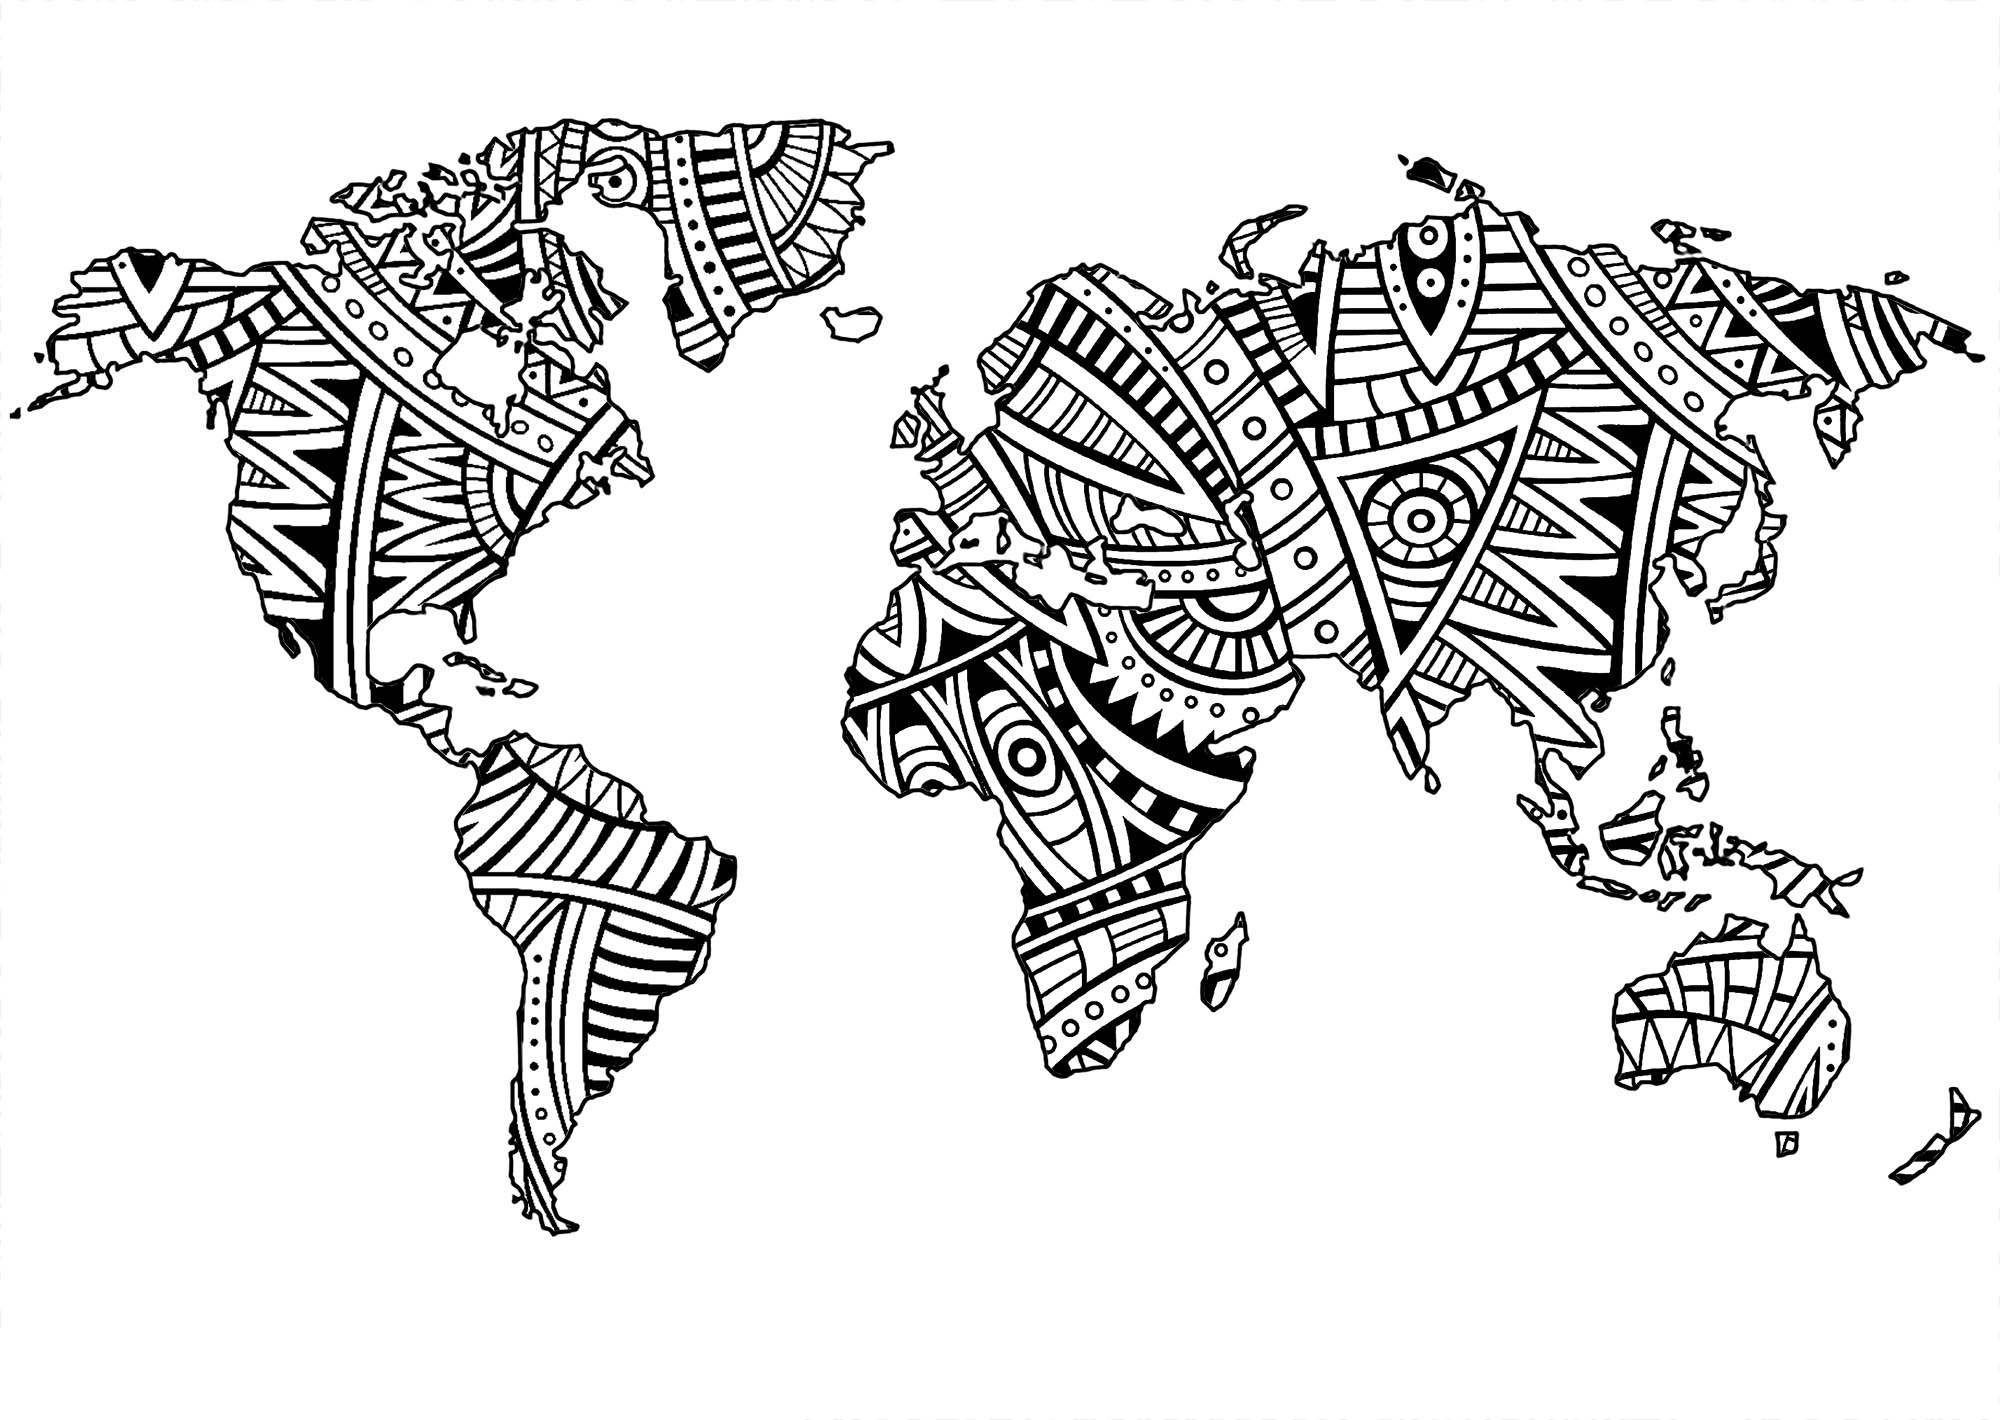 Our planet Earth and its continents, with simple Zentangle patterns inside the continents